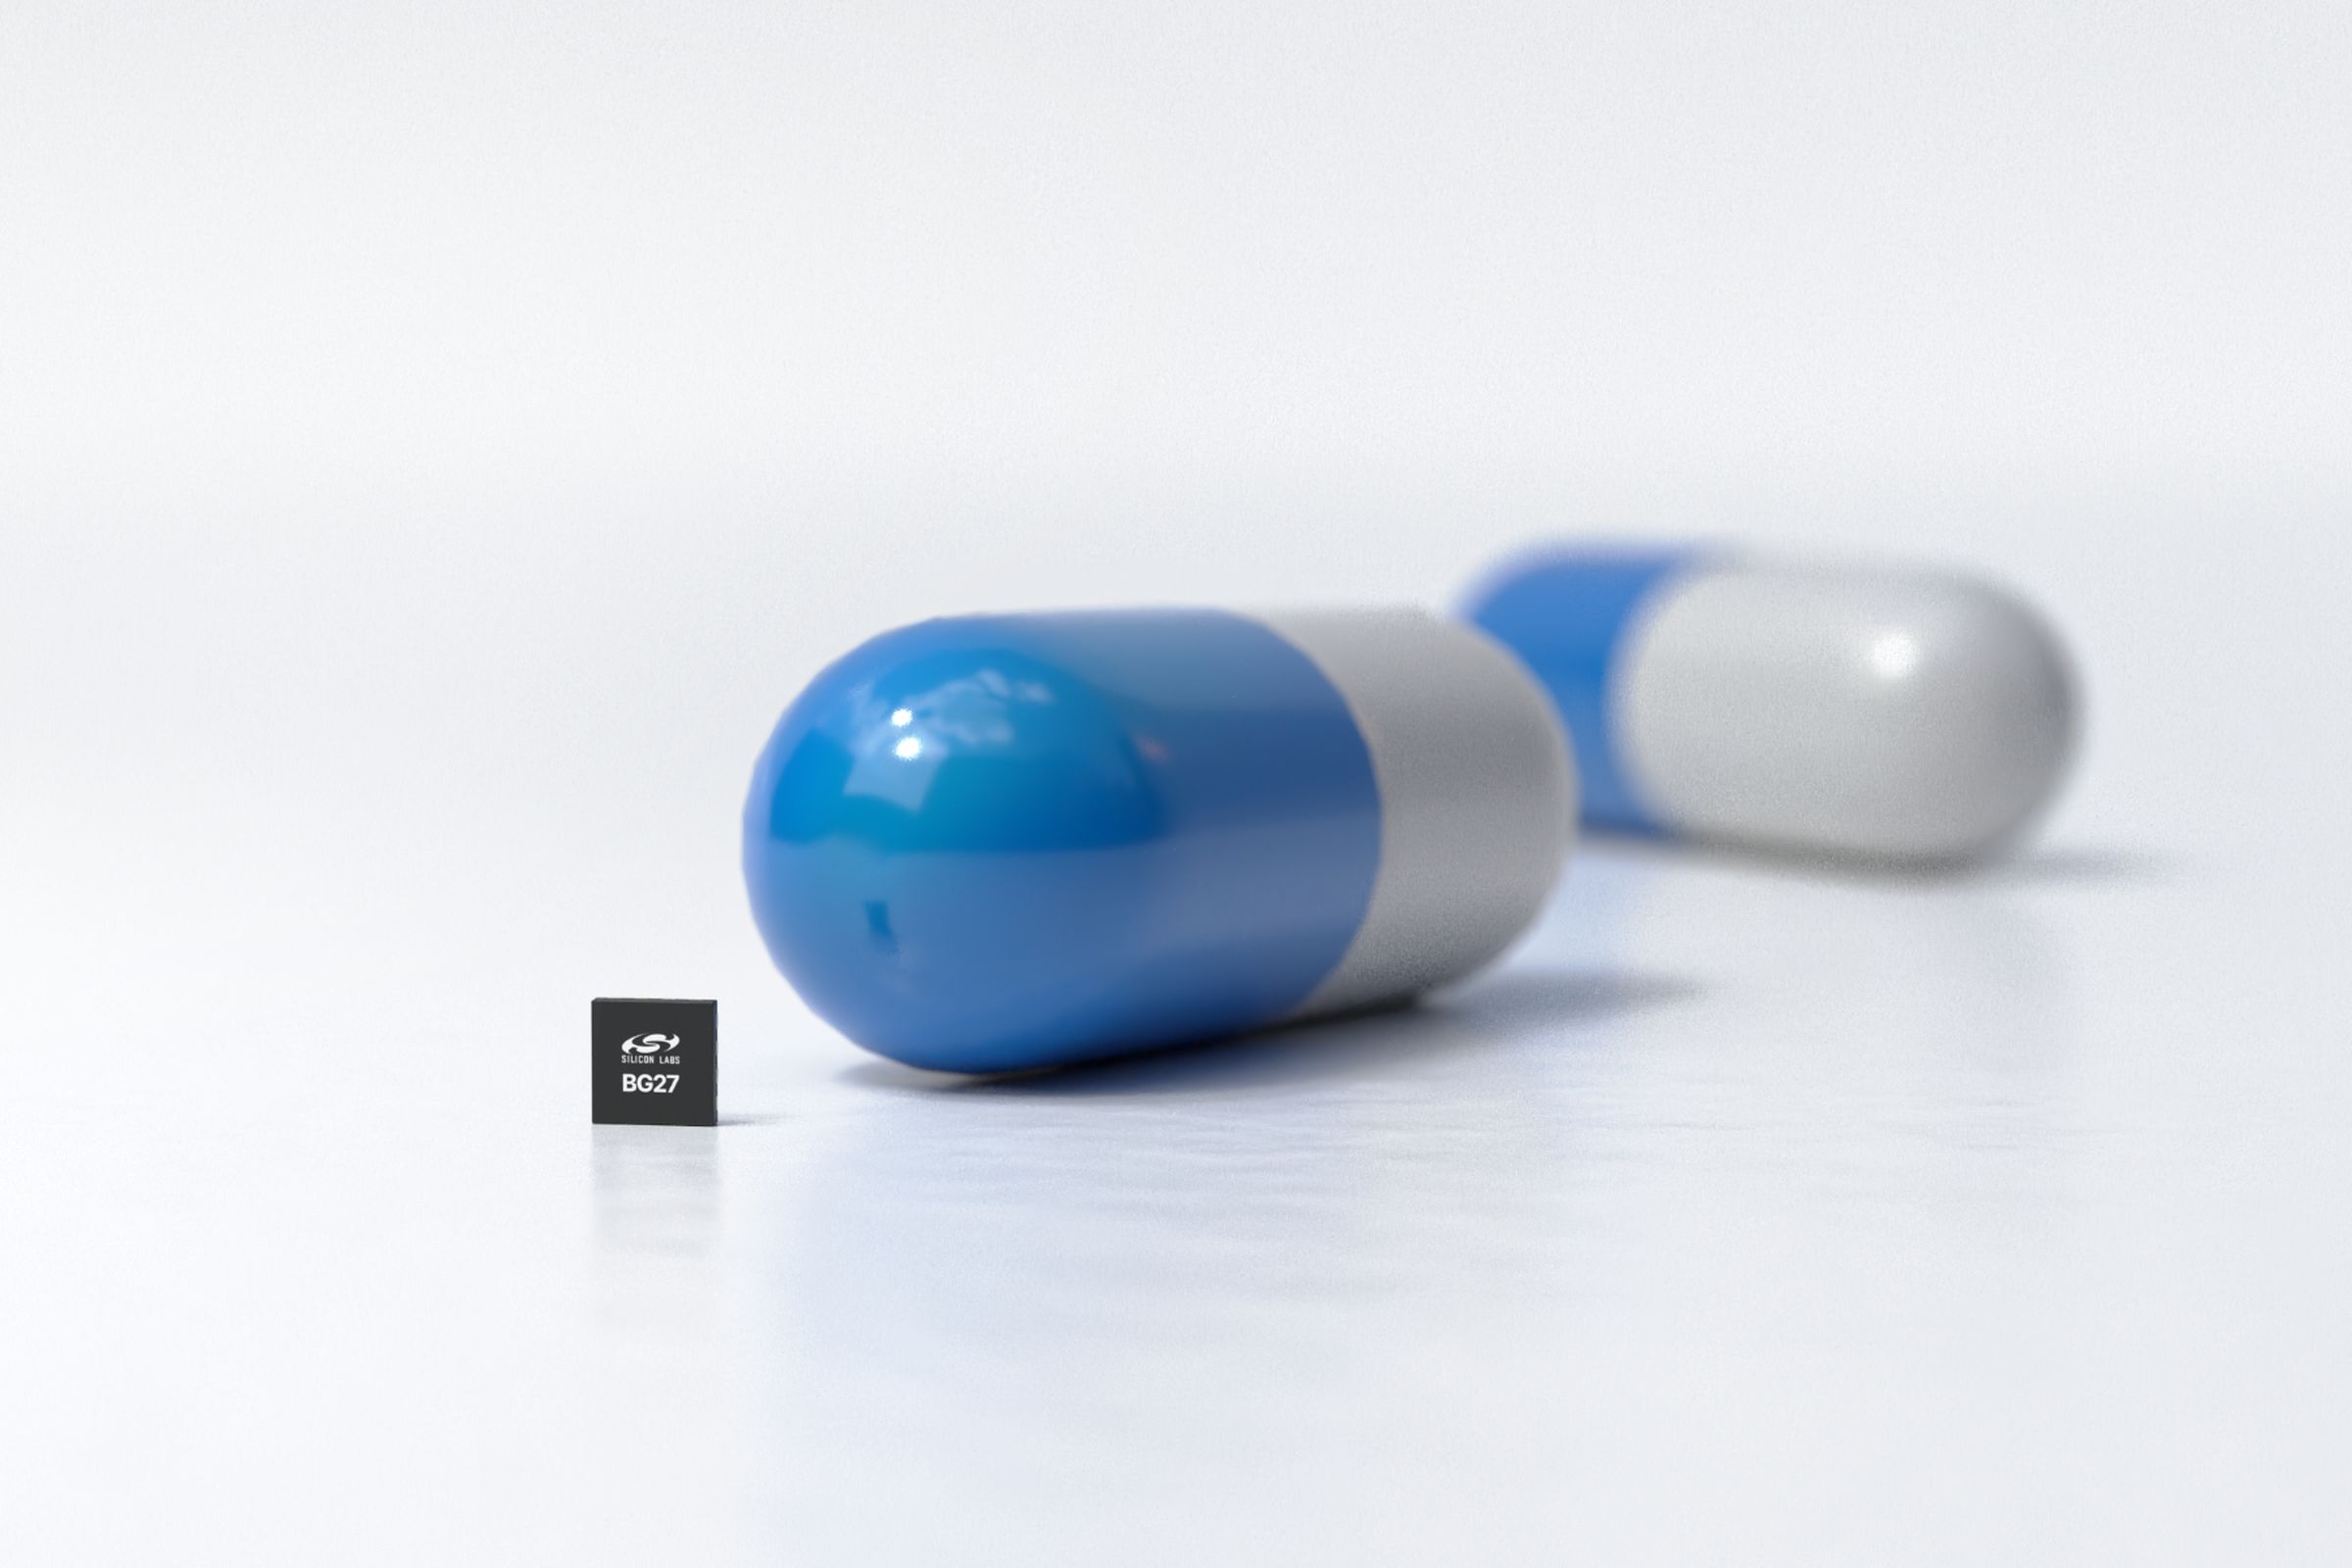 Tiny square chipset next to a seemingly giant pill capsule.